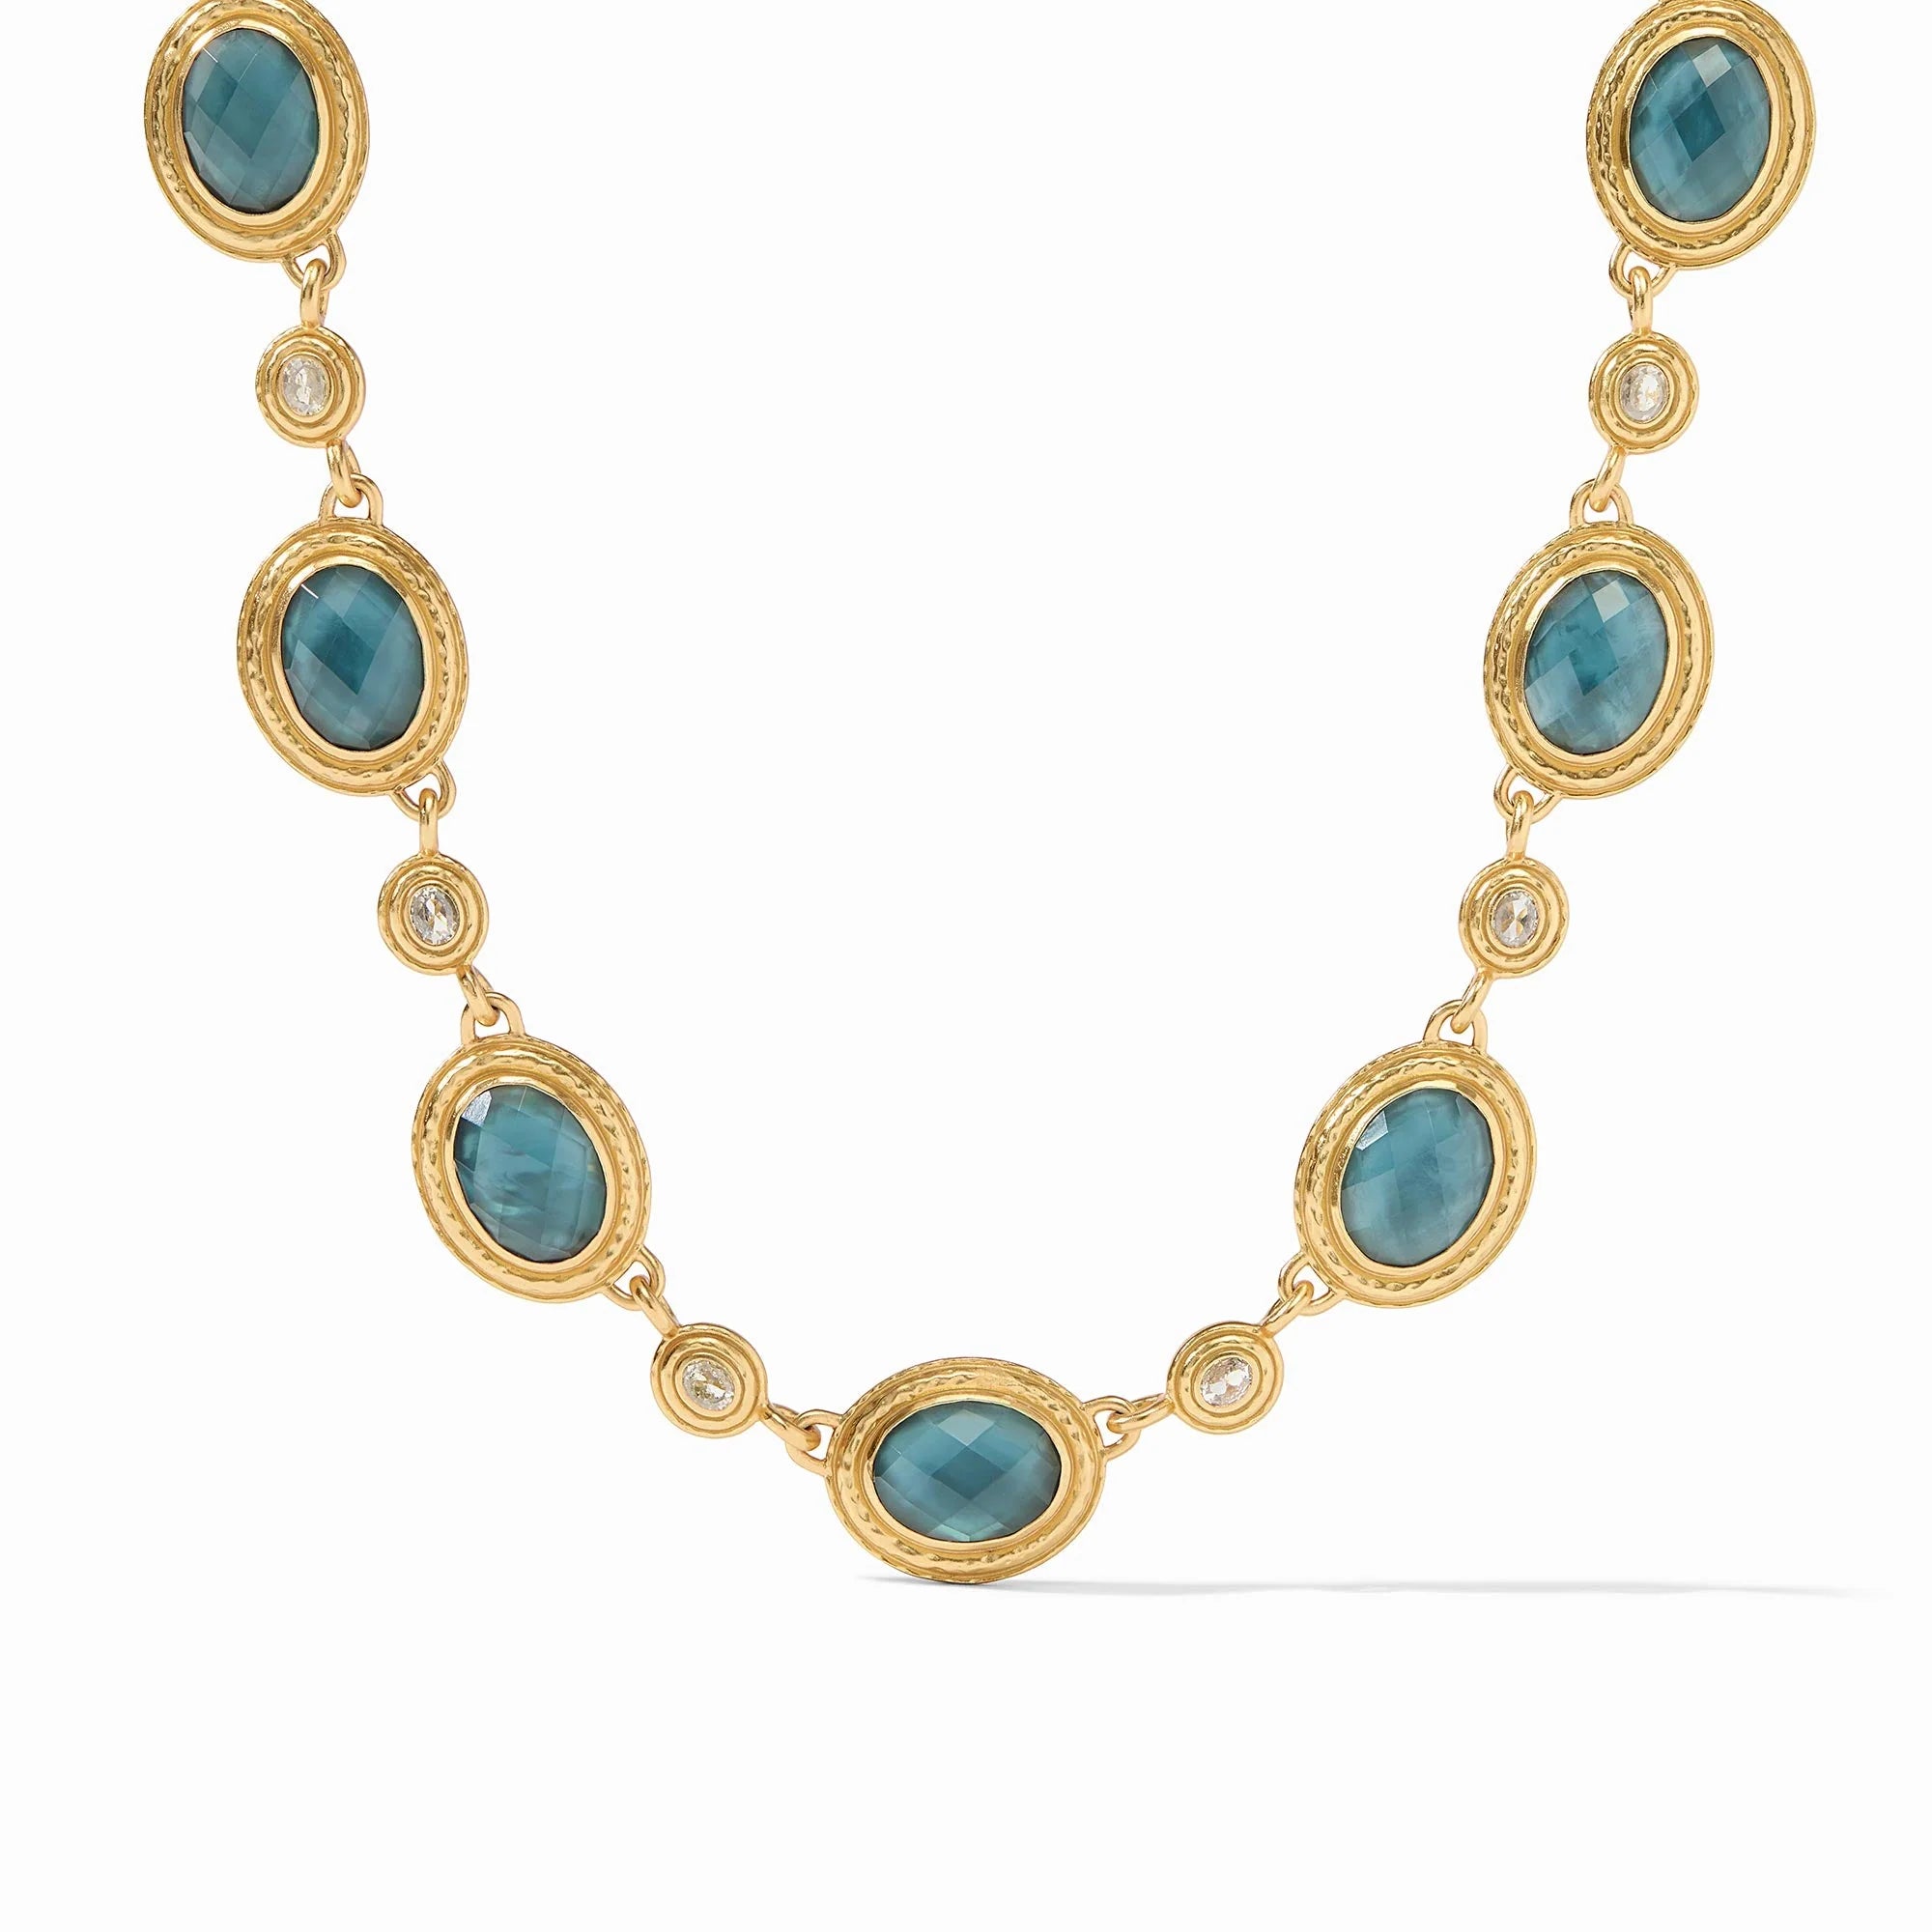 Julie Vos Tudor Stone Necklace in Iridescent Peacock Blue